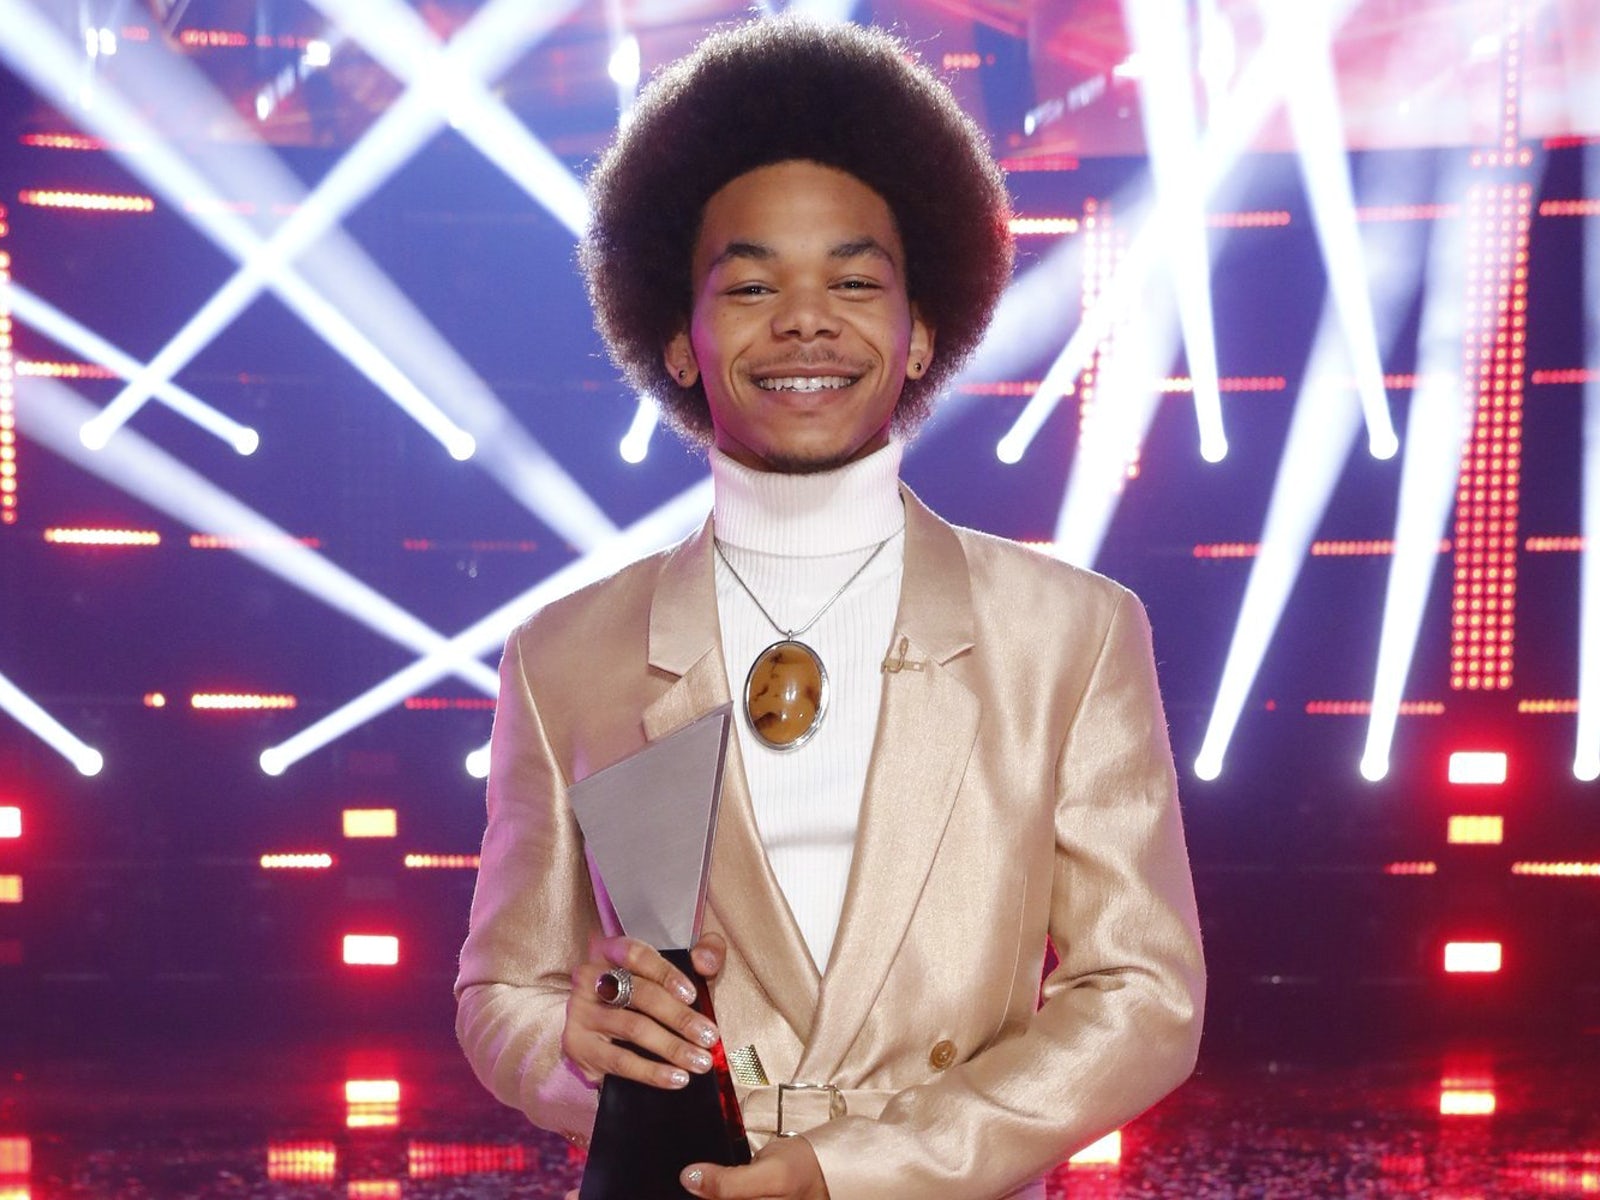 'The Voice' crowns Cam Anthony Season 20 champion over runner-up Kenzie